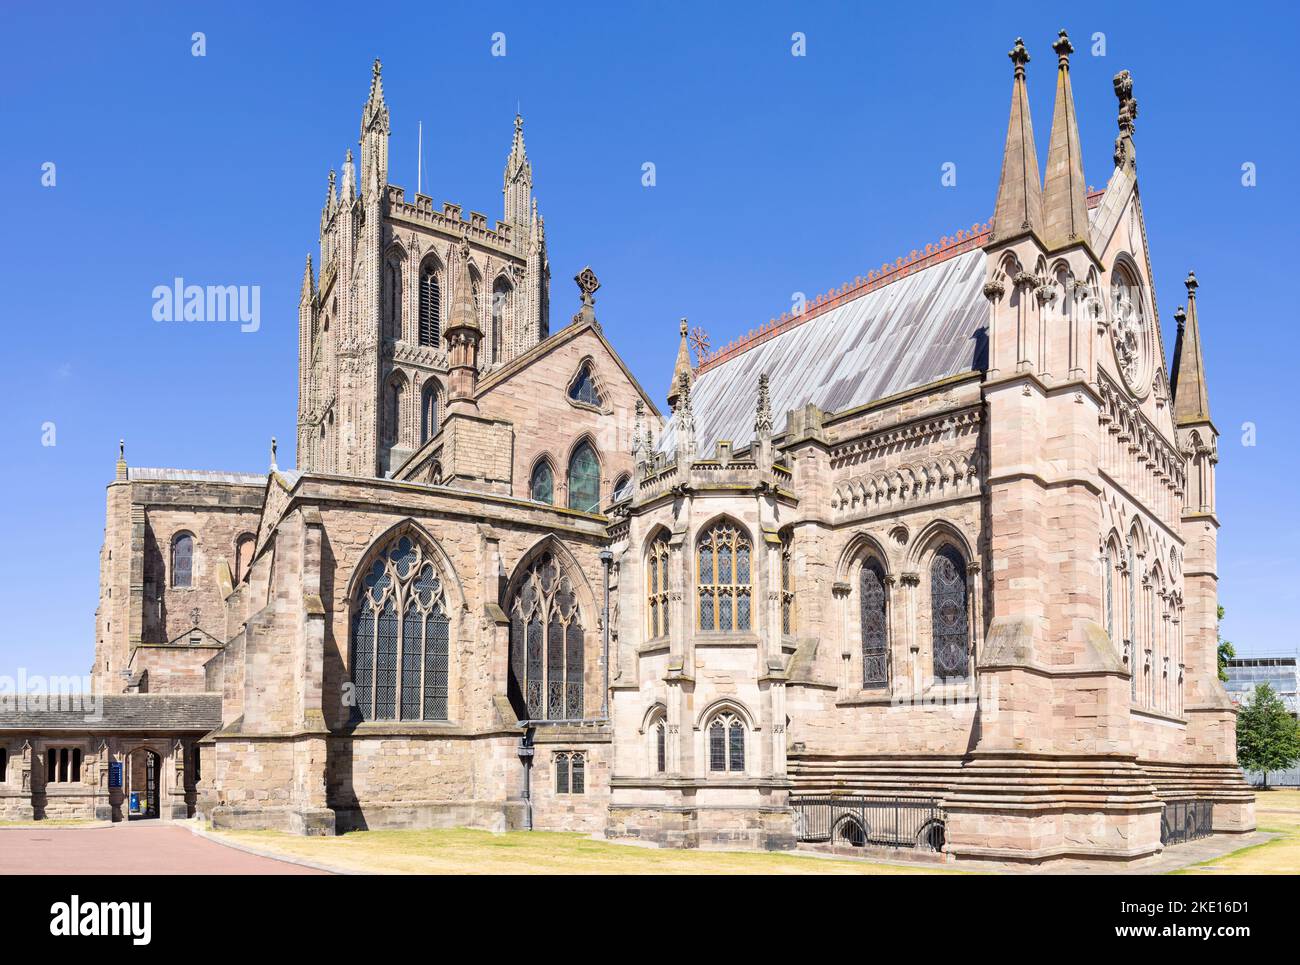 Hereford Cathedral or the Hereford Cathedral of Saint Mary the Virgin and Saint Ethelbert the King Hereford Herefordshire England UK GB Europe Stock Photo